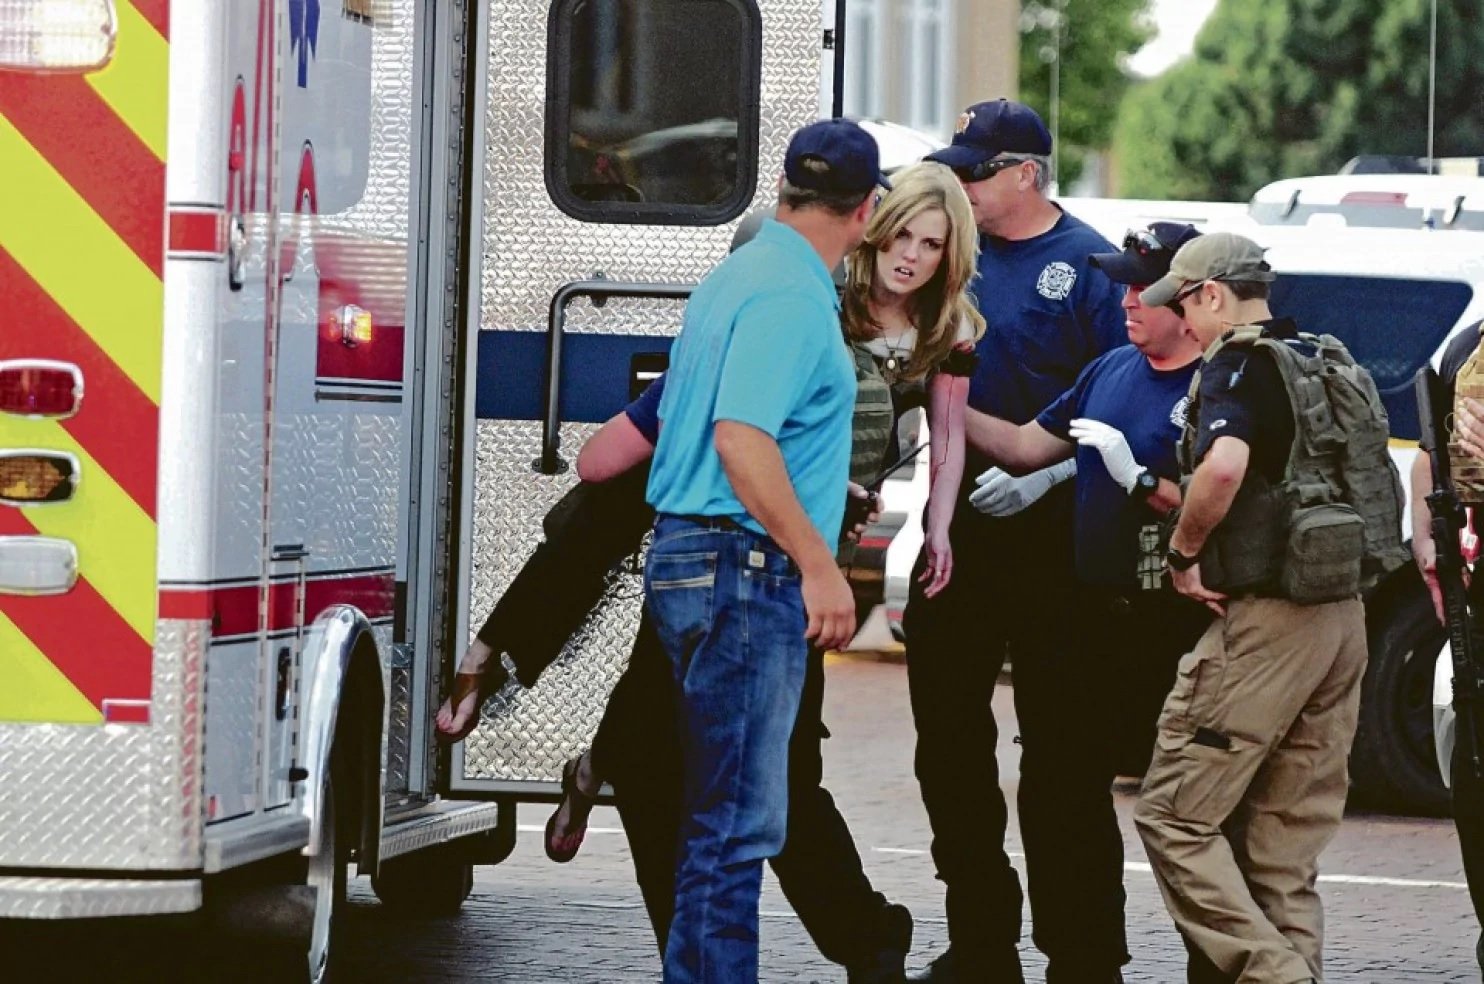 An injured woman is carried to an ambulance in Clovis